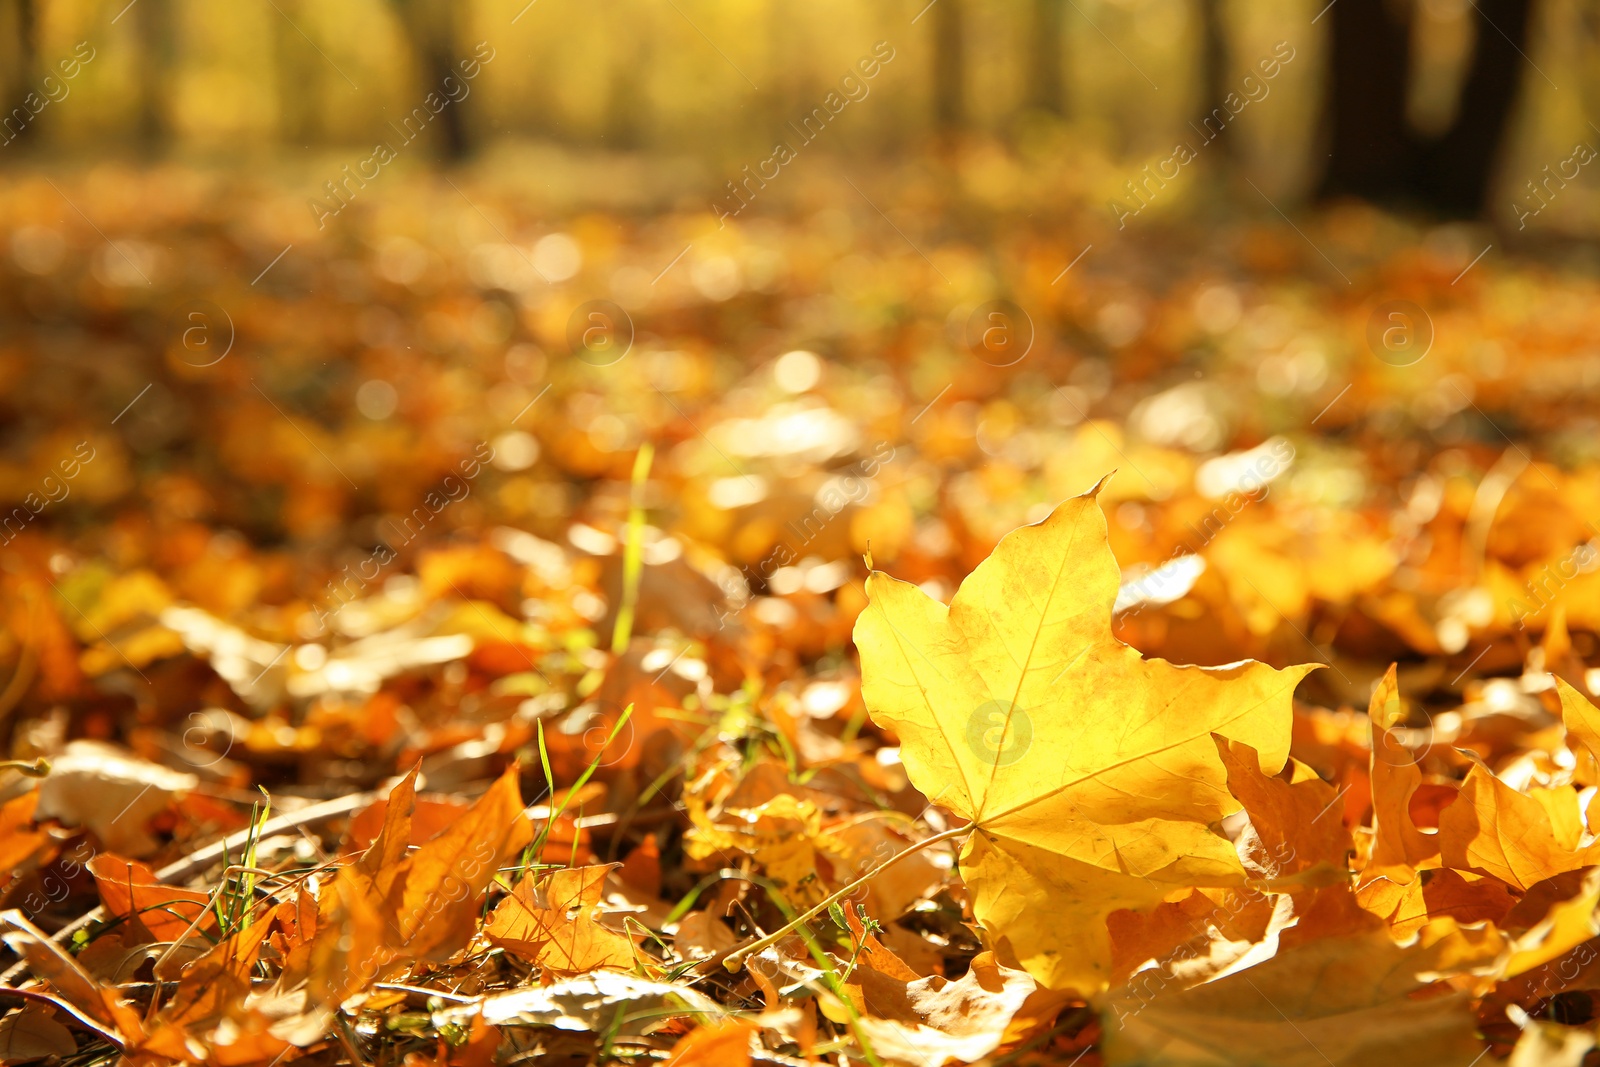 Photo of Autumn leaves on ground in beautiful park